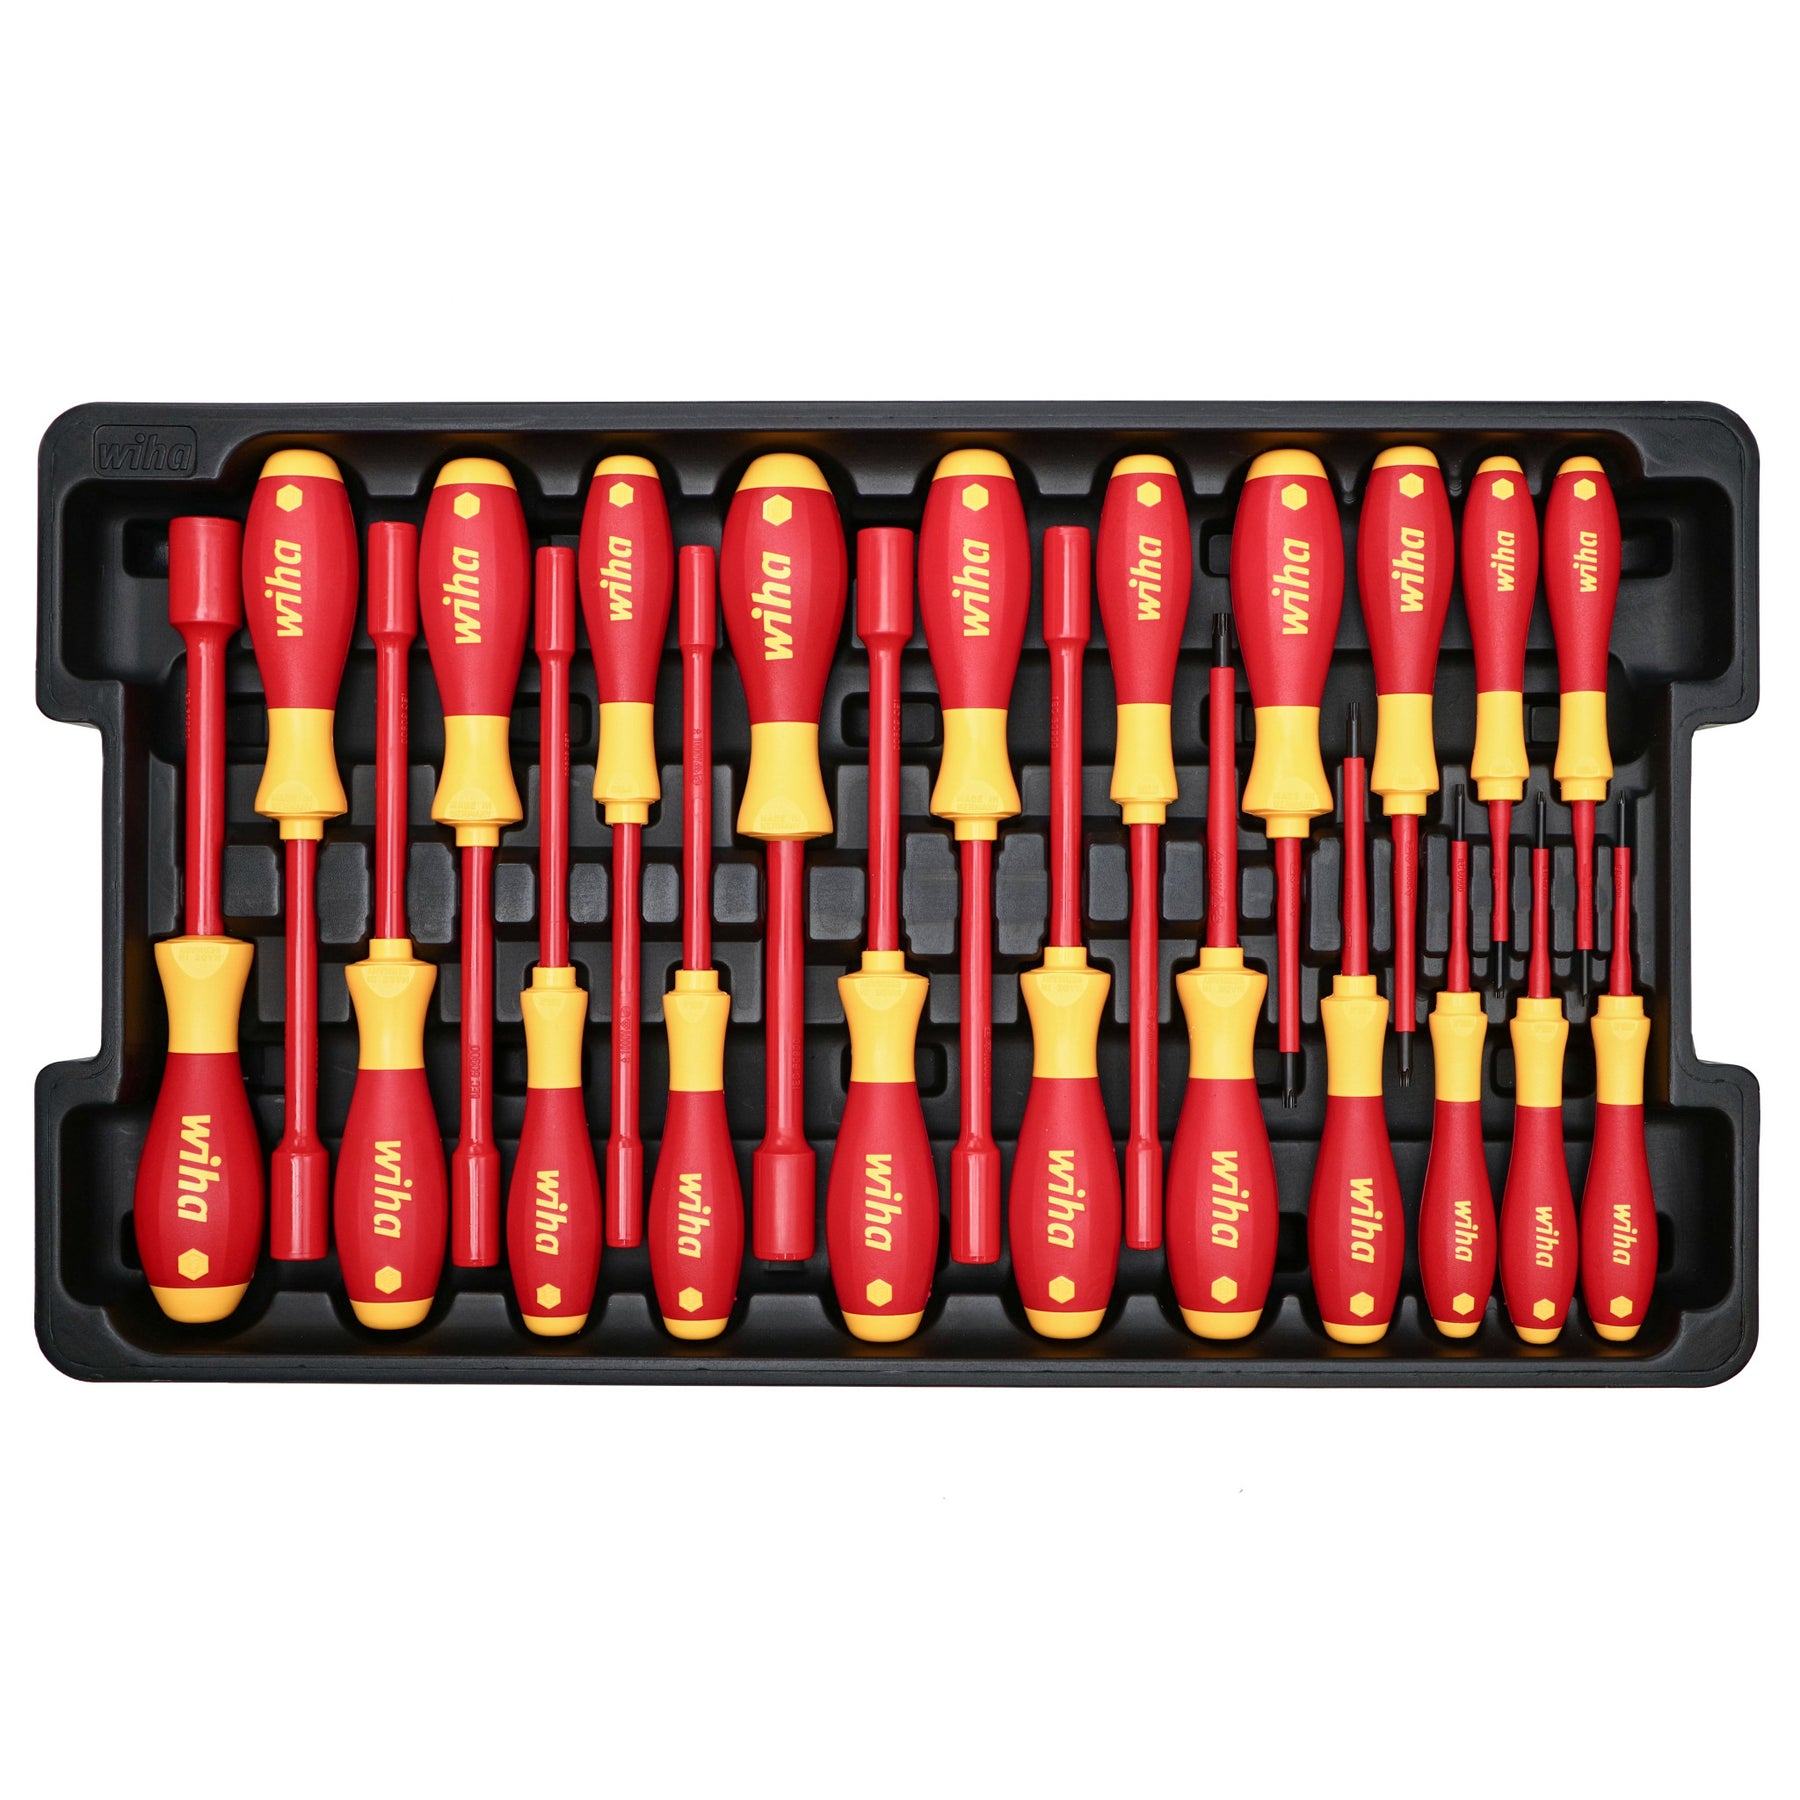 80 Piece Master Electrician's Insulated Tools Set In Rolling Hard Case